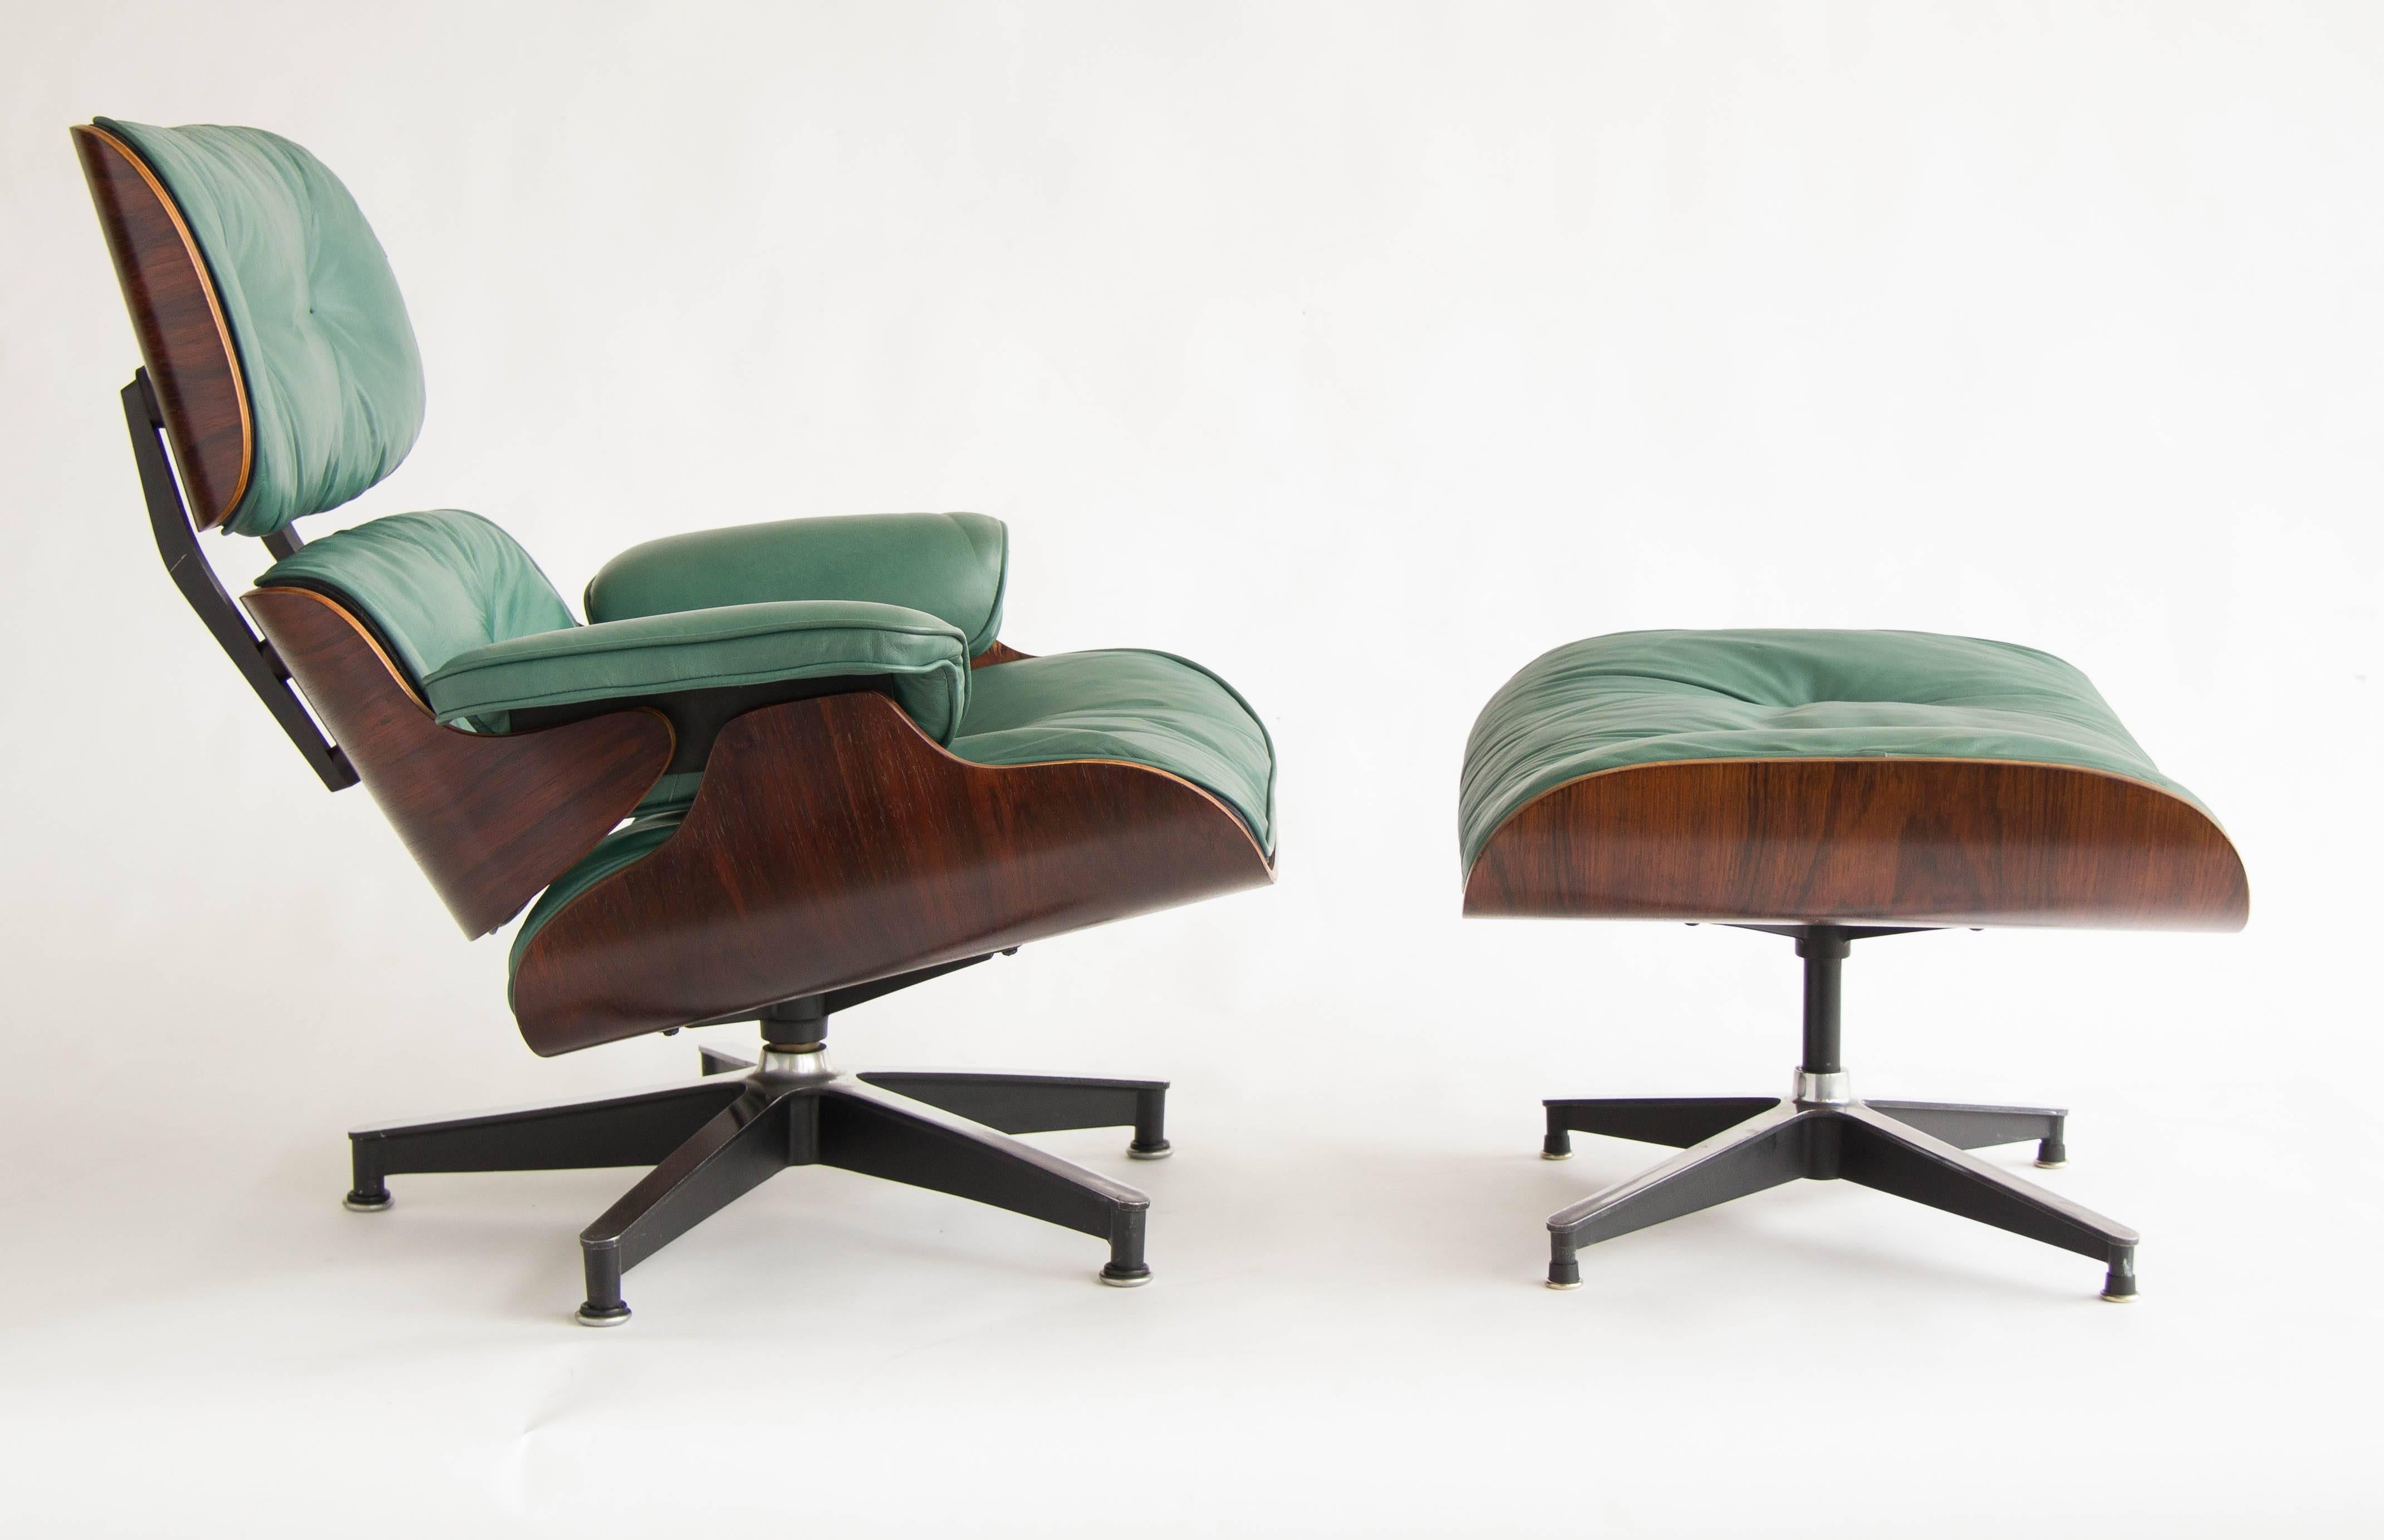 This Eames Lounge chair was ordered directly from Herman Miller in the late 1950s. Three main characteristics that prove this chair was produced before 1960: Three screws under the armrests, down filled cushions, and the push on glides on the